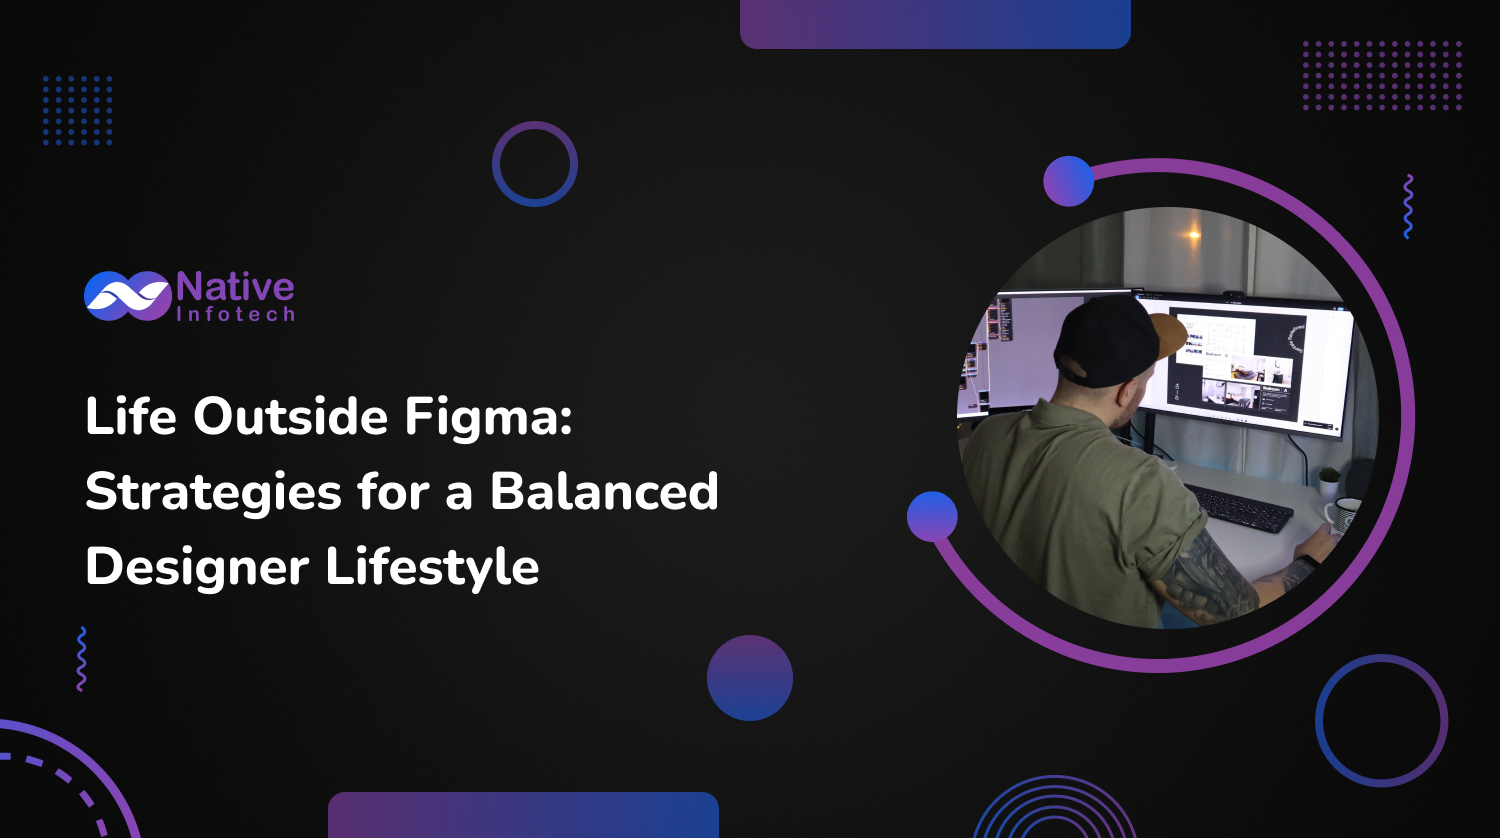 Life Outside Figma: Strategies for a Balanced Designer Lifestyle | Native Infotech